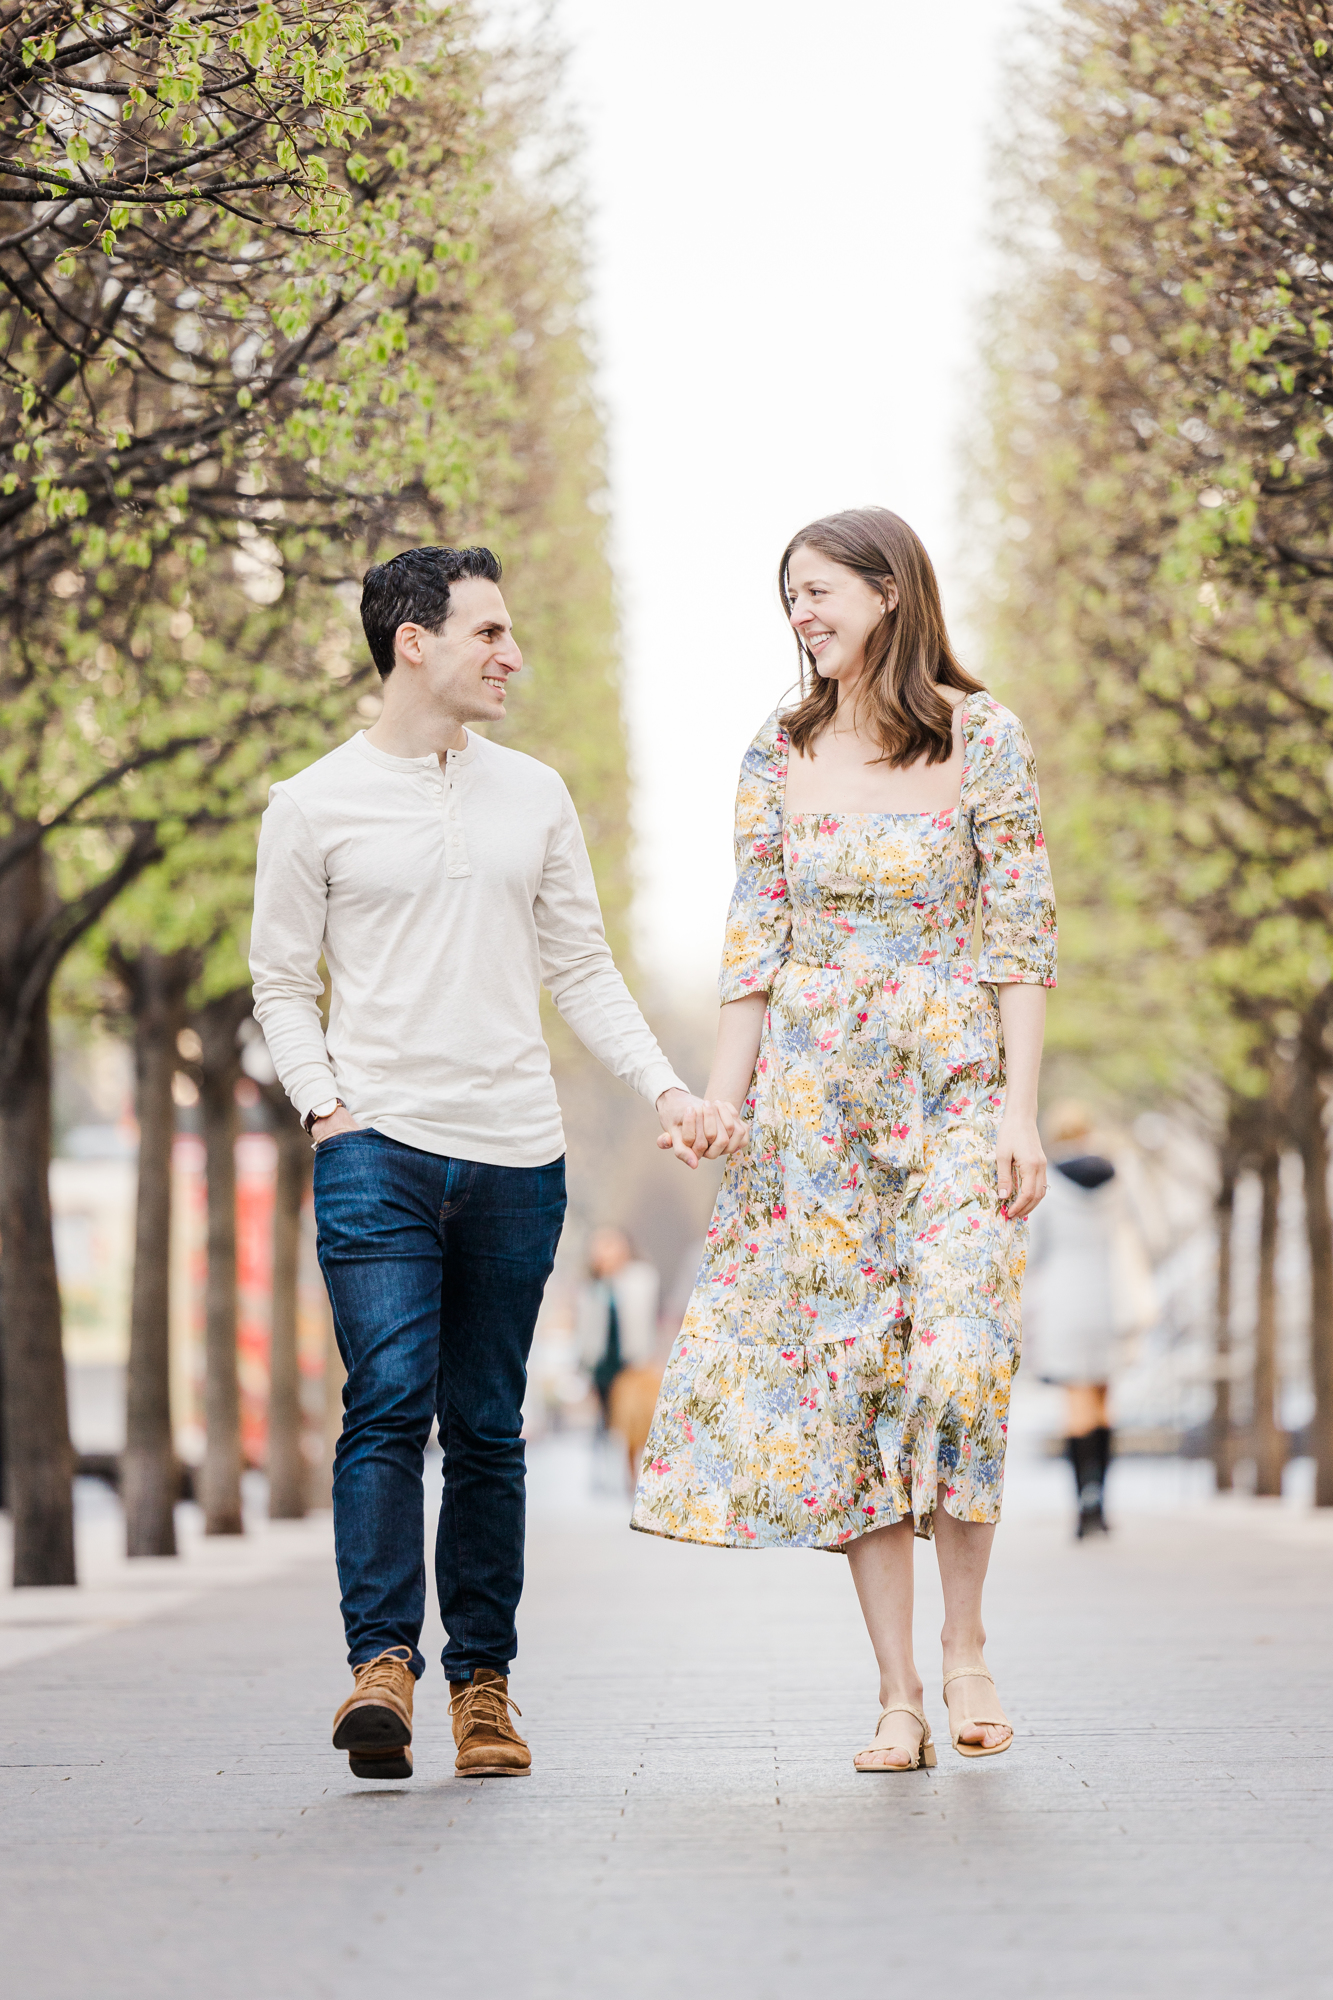 Special Upper East Side Engagement Photo Shoot